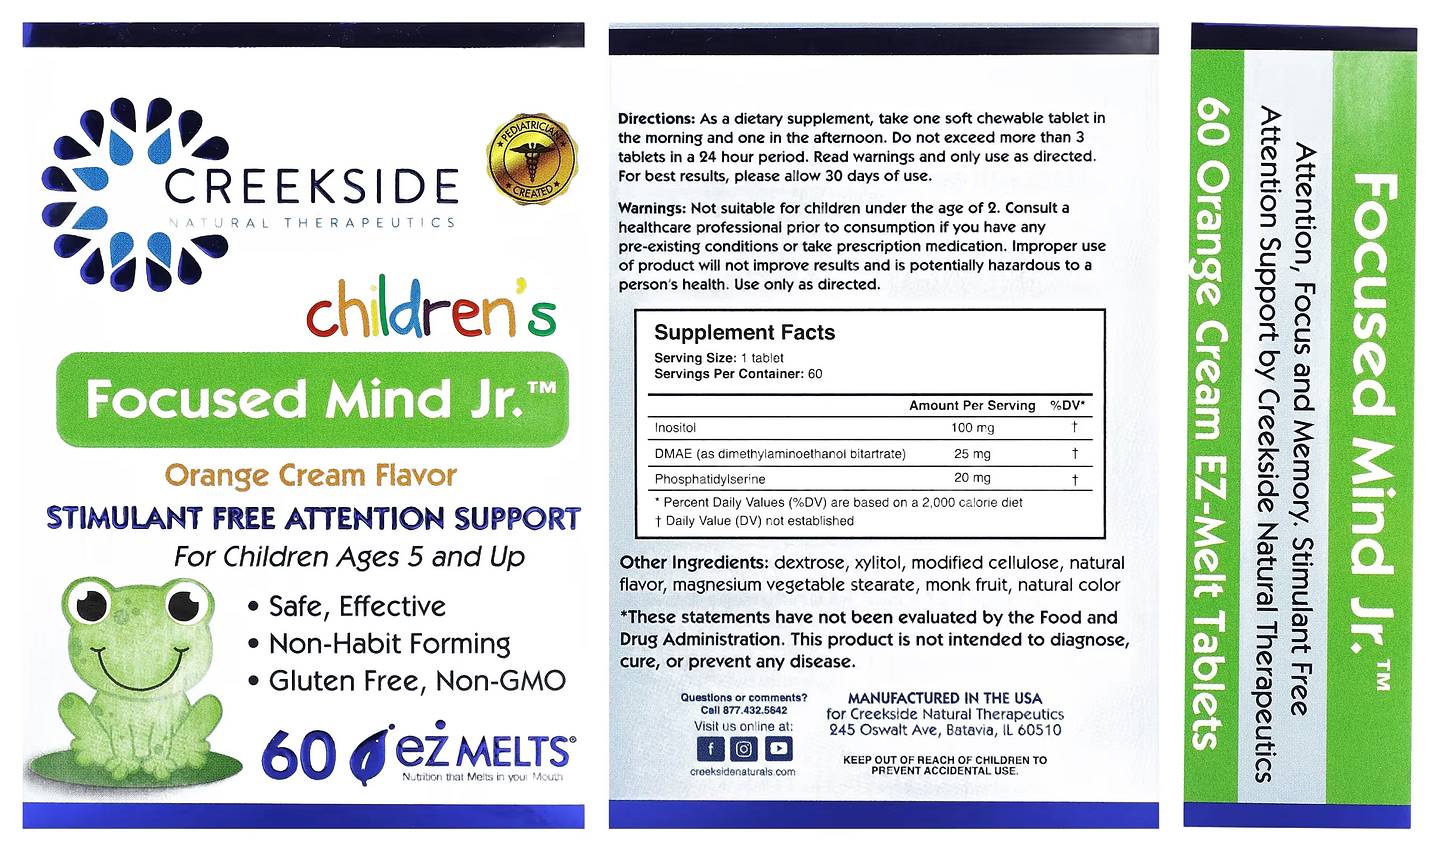 Creekside Natural Therapeutics, Children's Focused Mind Jr packaging